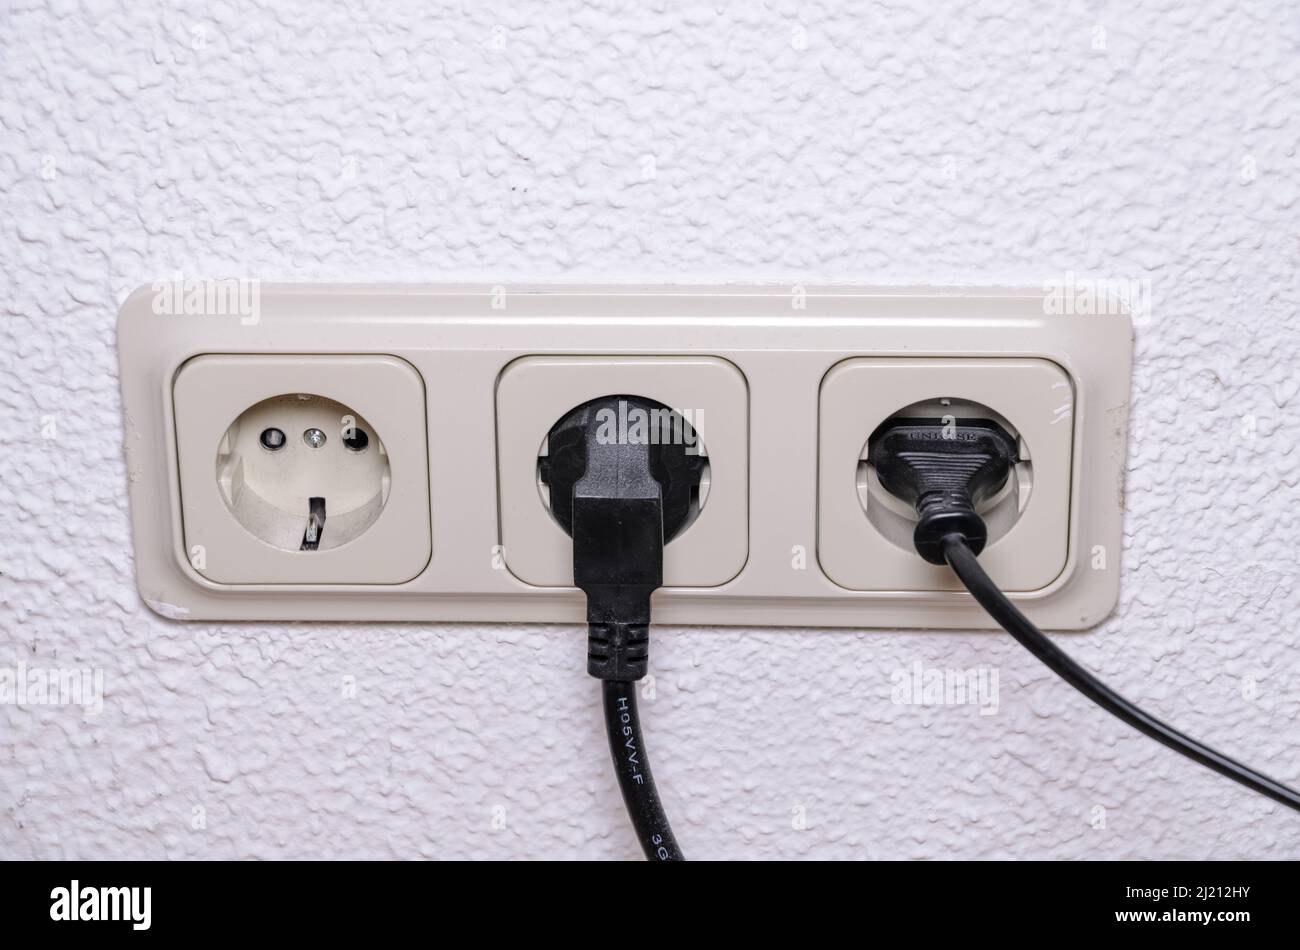 Power outlet or sockets on white wall indoors, Germany, Europe Stock Photo